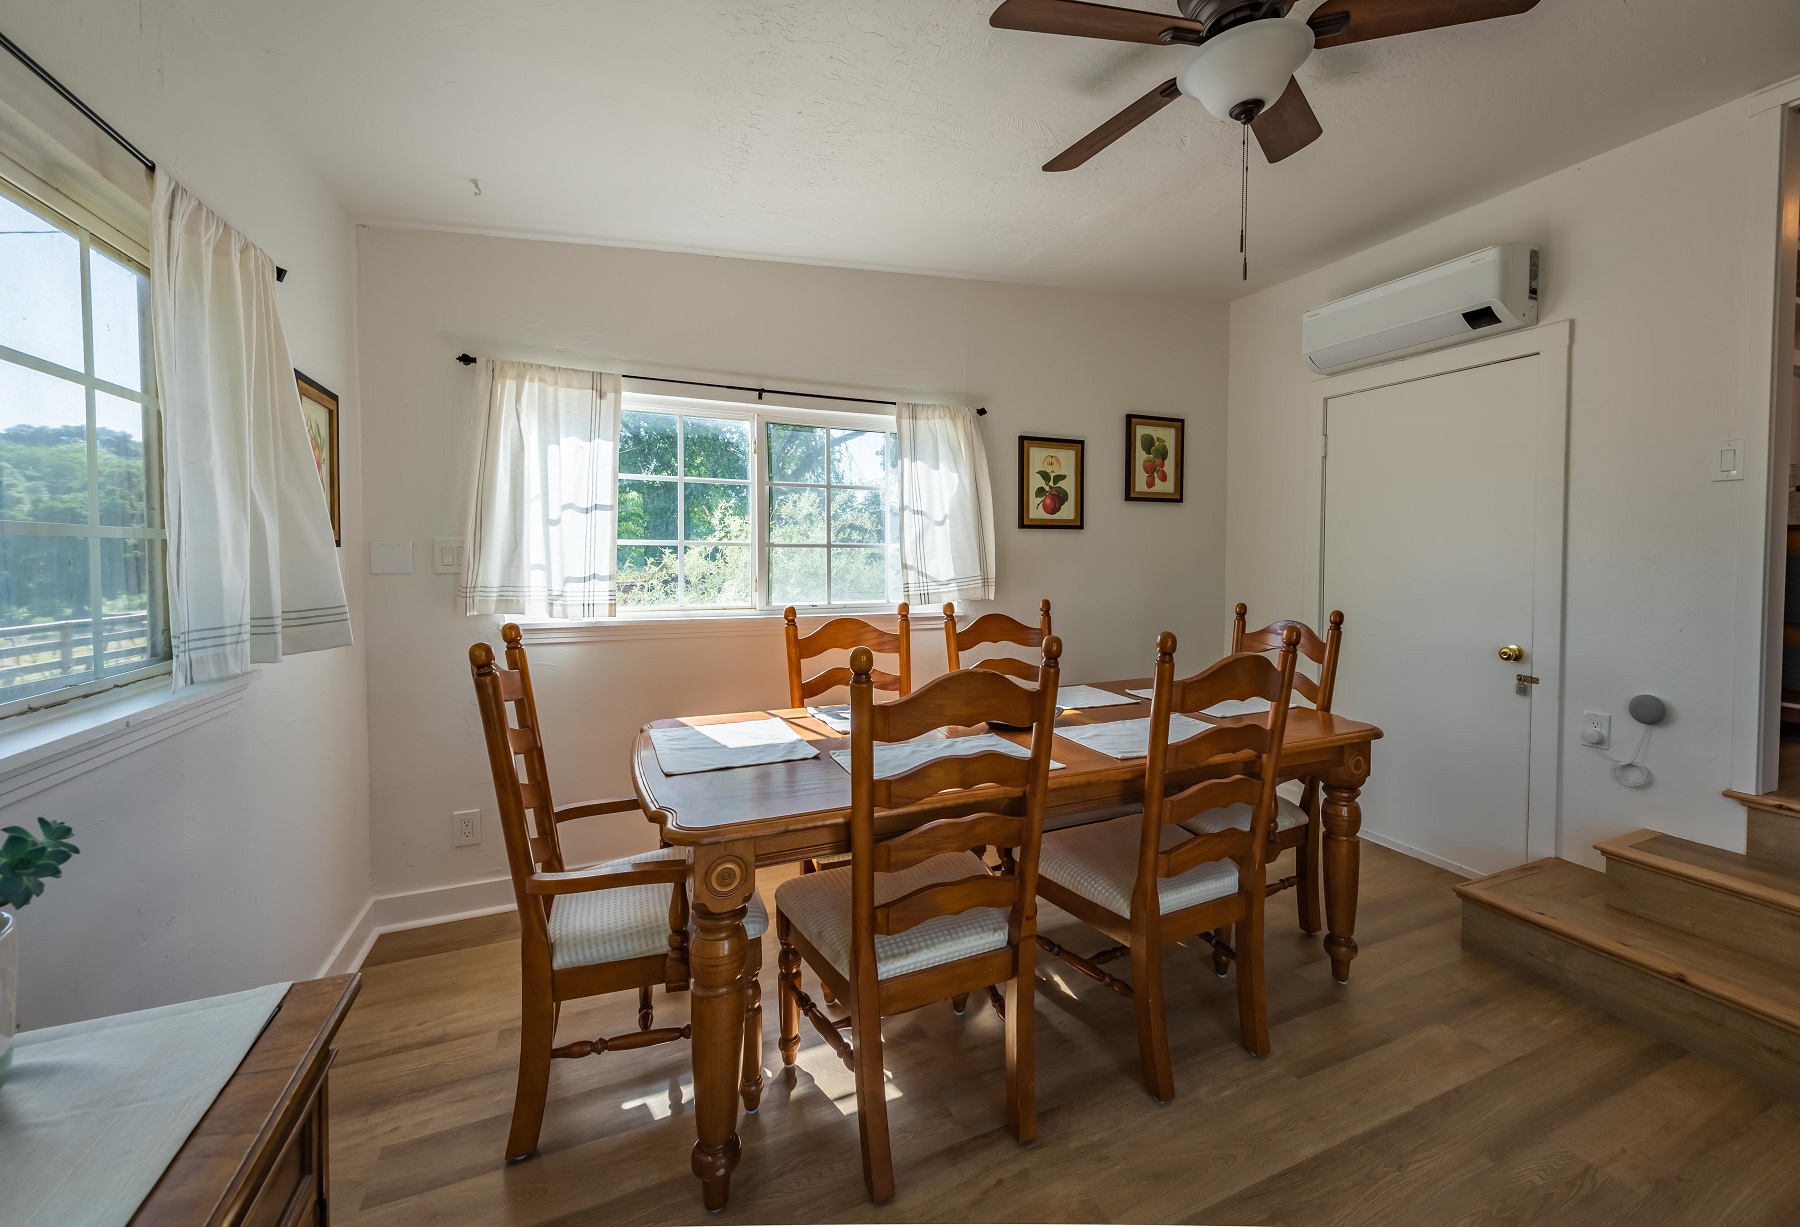 The separate dining room is great for dinners and has seating for 6